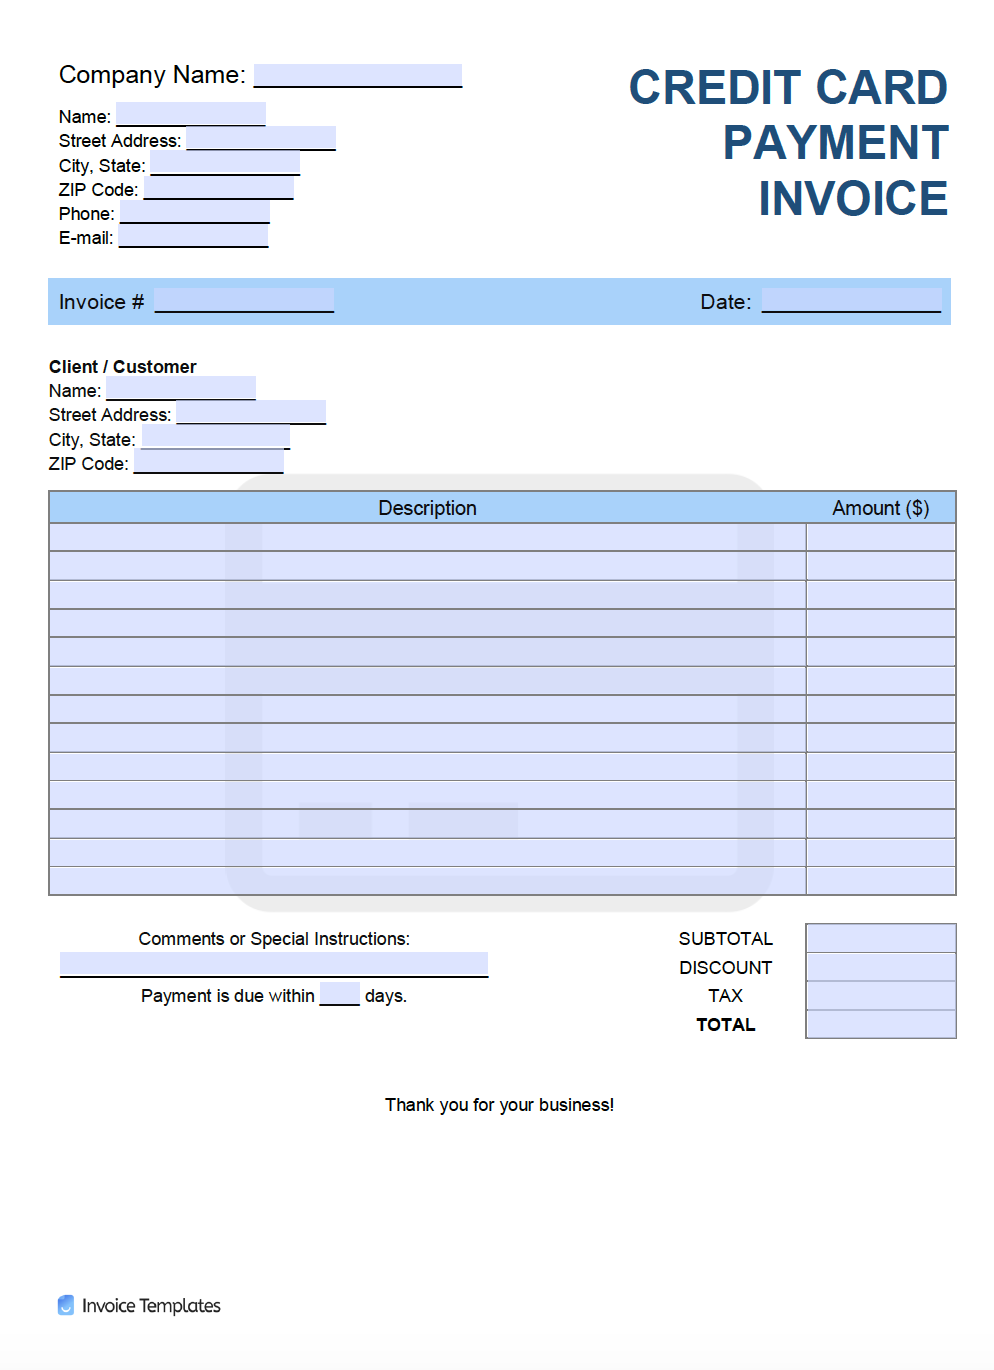 Free Credit Card (cc) Payment Invoice Template | PDF | WORD | EXCEL